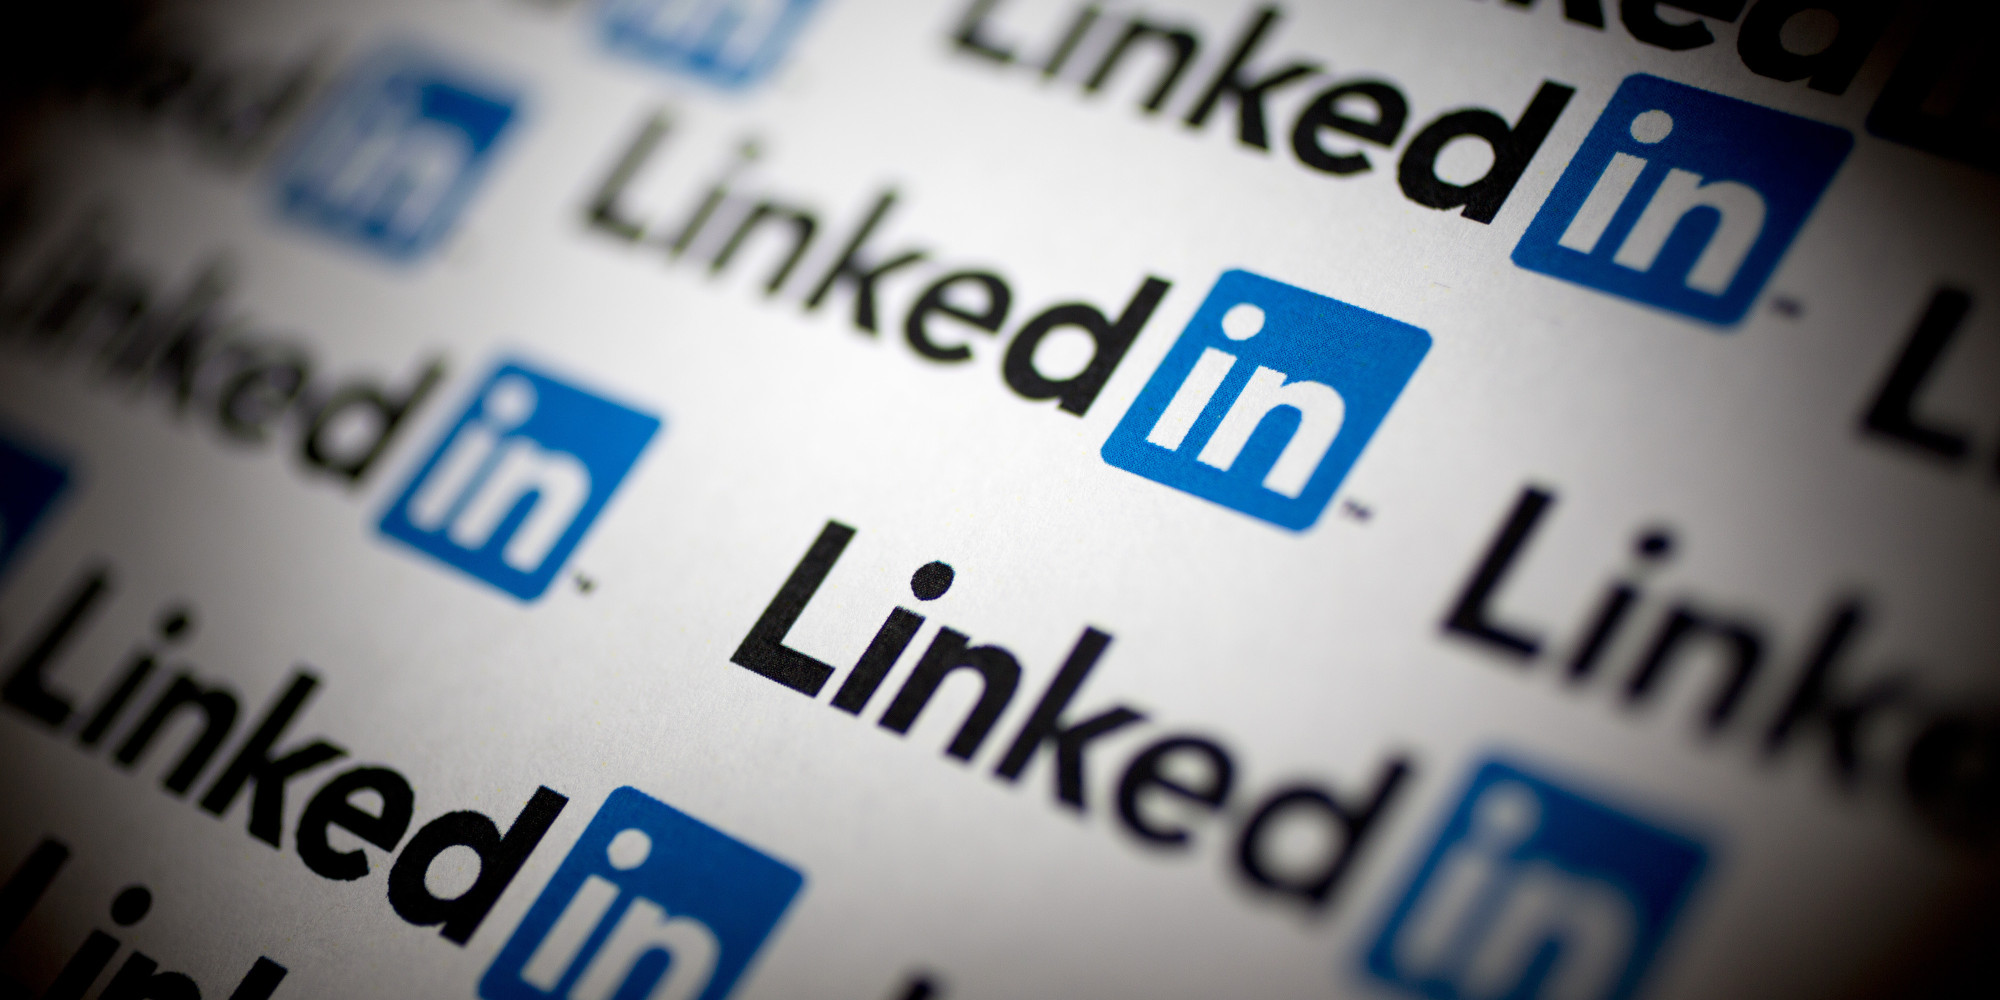 LinkedIn Adds In-App Games to Boost Popularity of Wordle and Networking